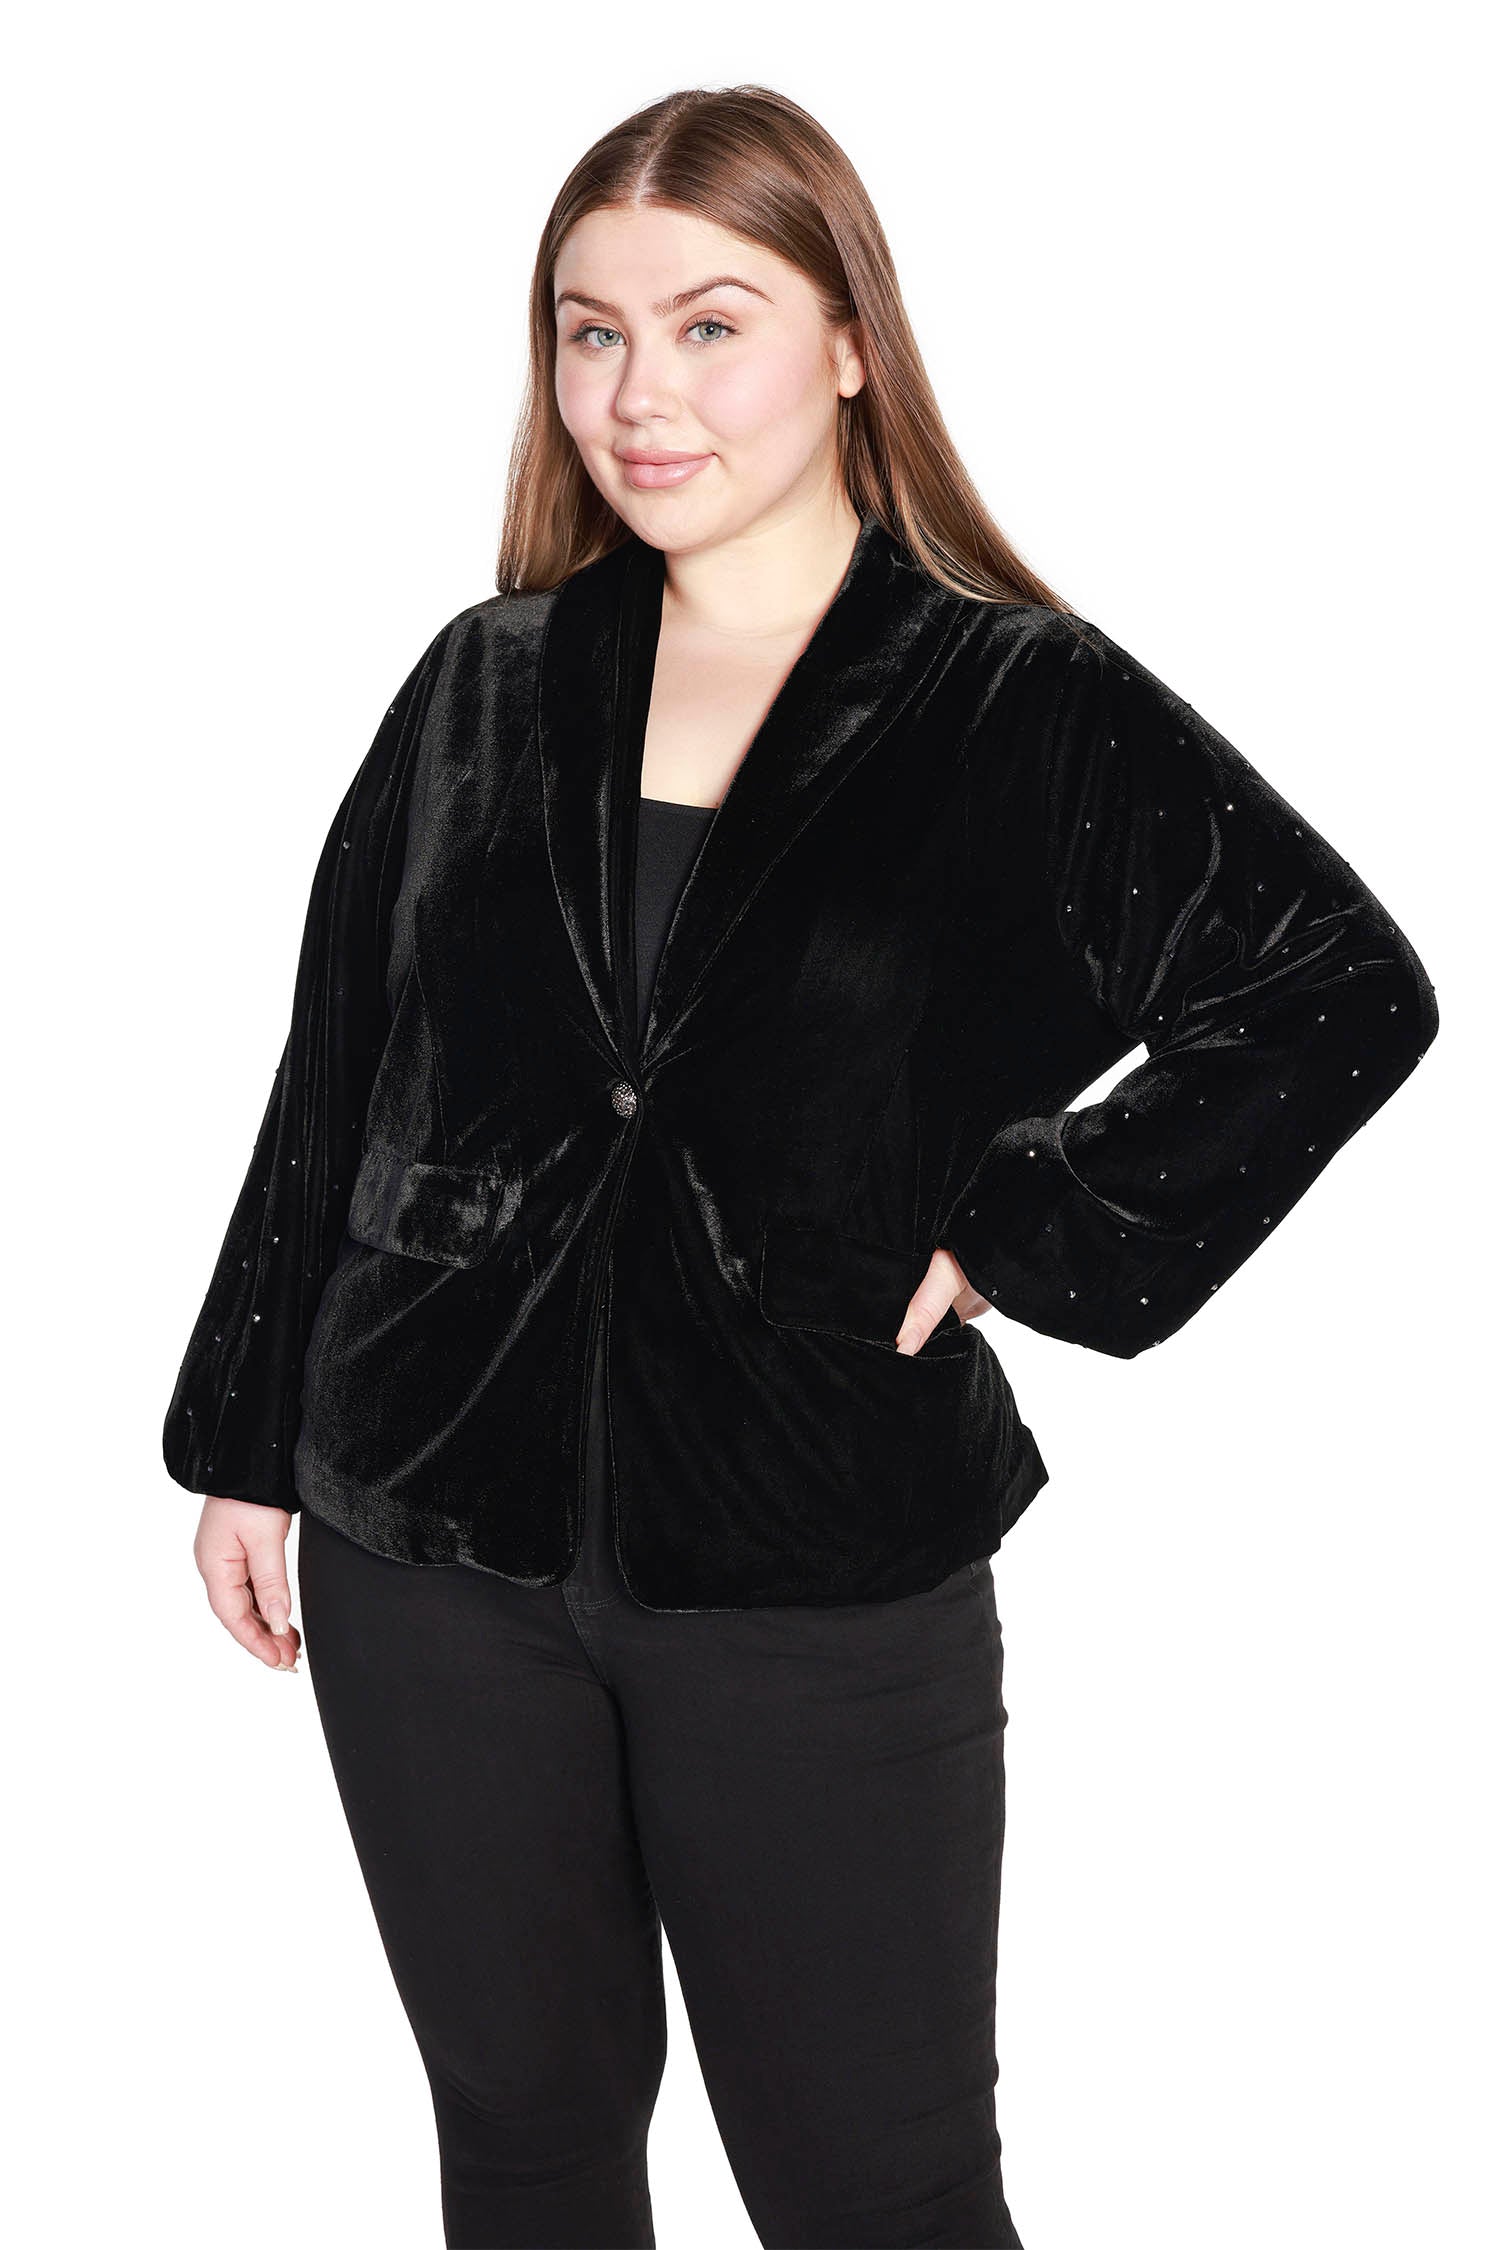 Women's Classic Stretch Velvet One Button Blazer with Blouson Sleeves and Rhinestone Detailing | Curvy - LAST CALL